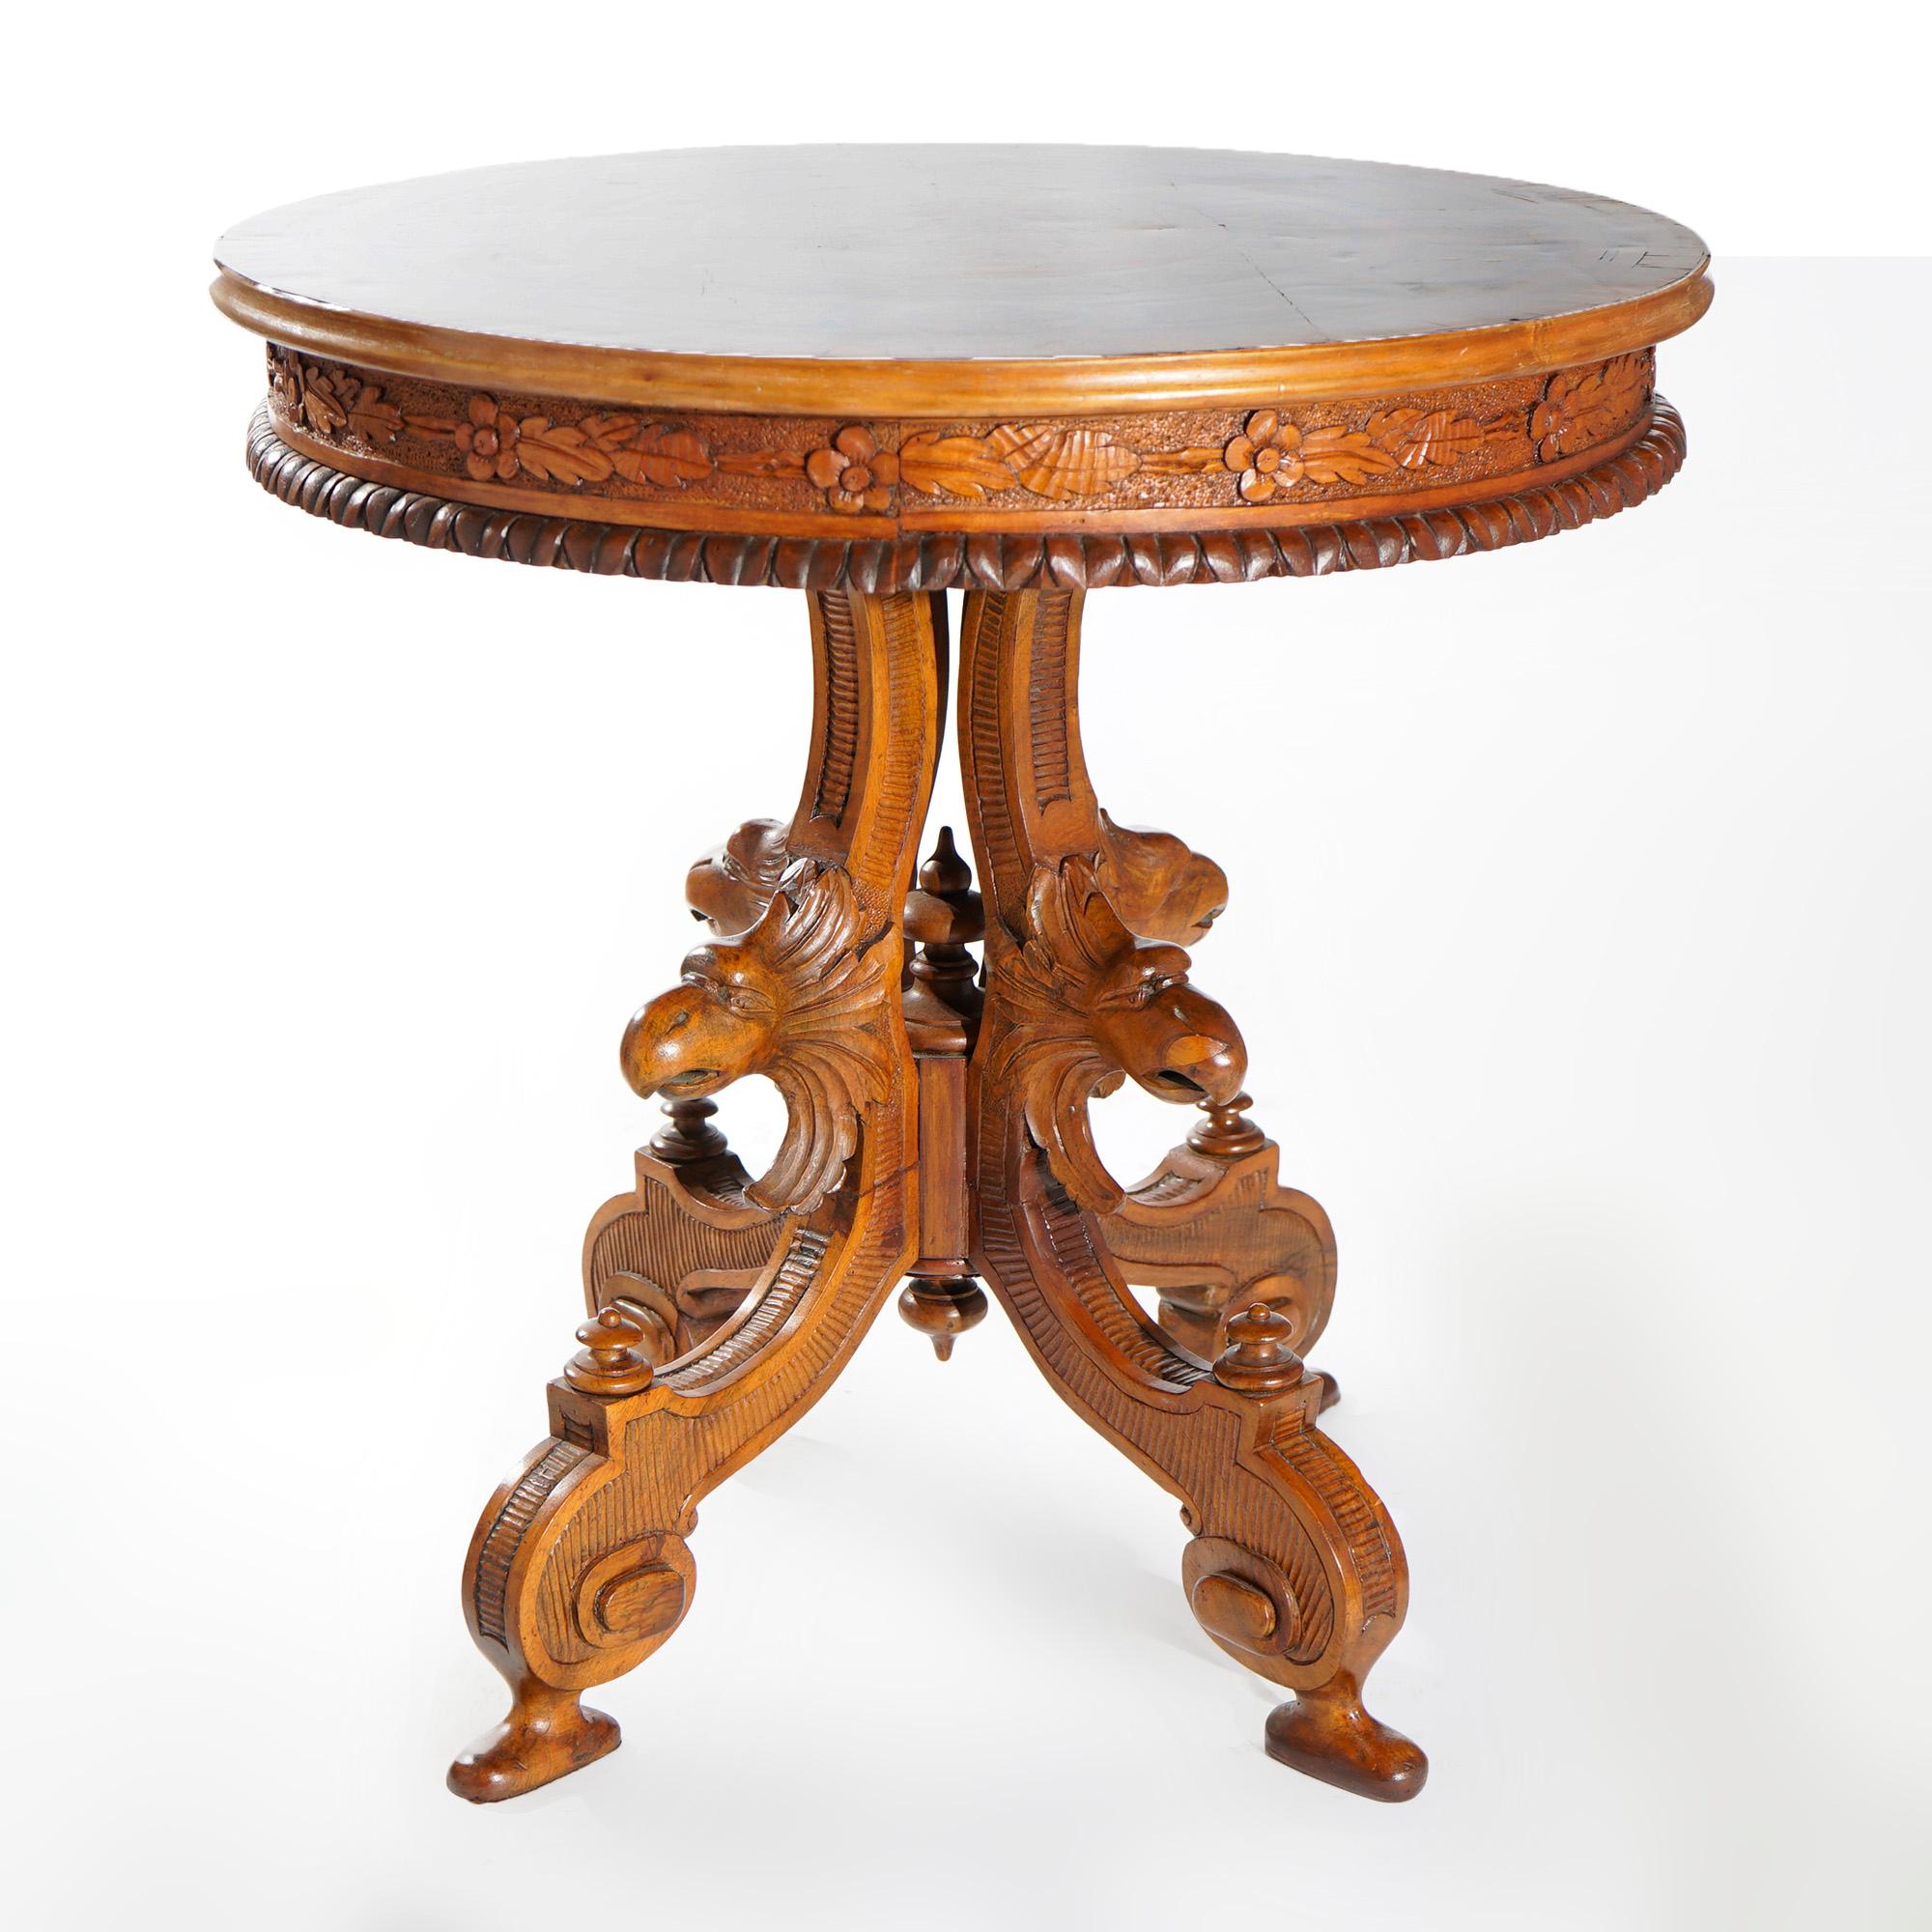 19th Century Antique Classical Marquetry Inlaid & Figural Carved Kingwood Center Table 19th C